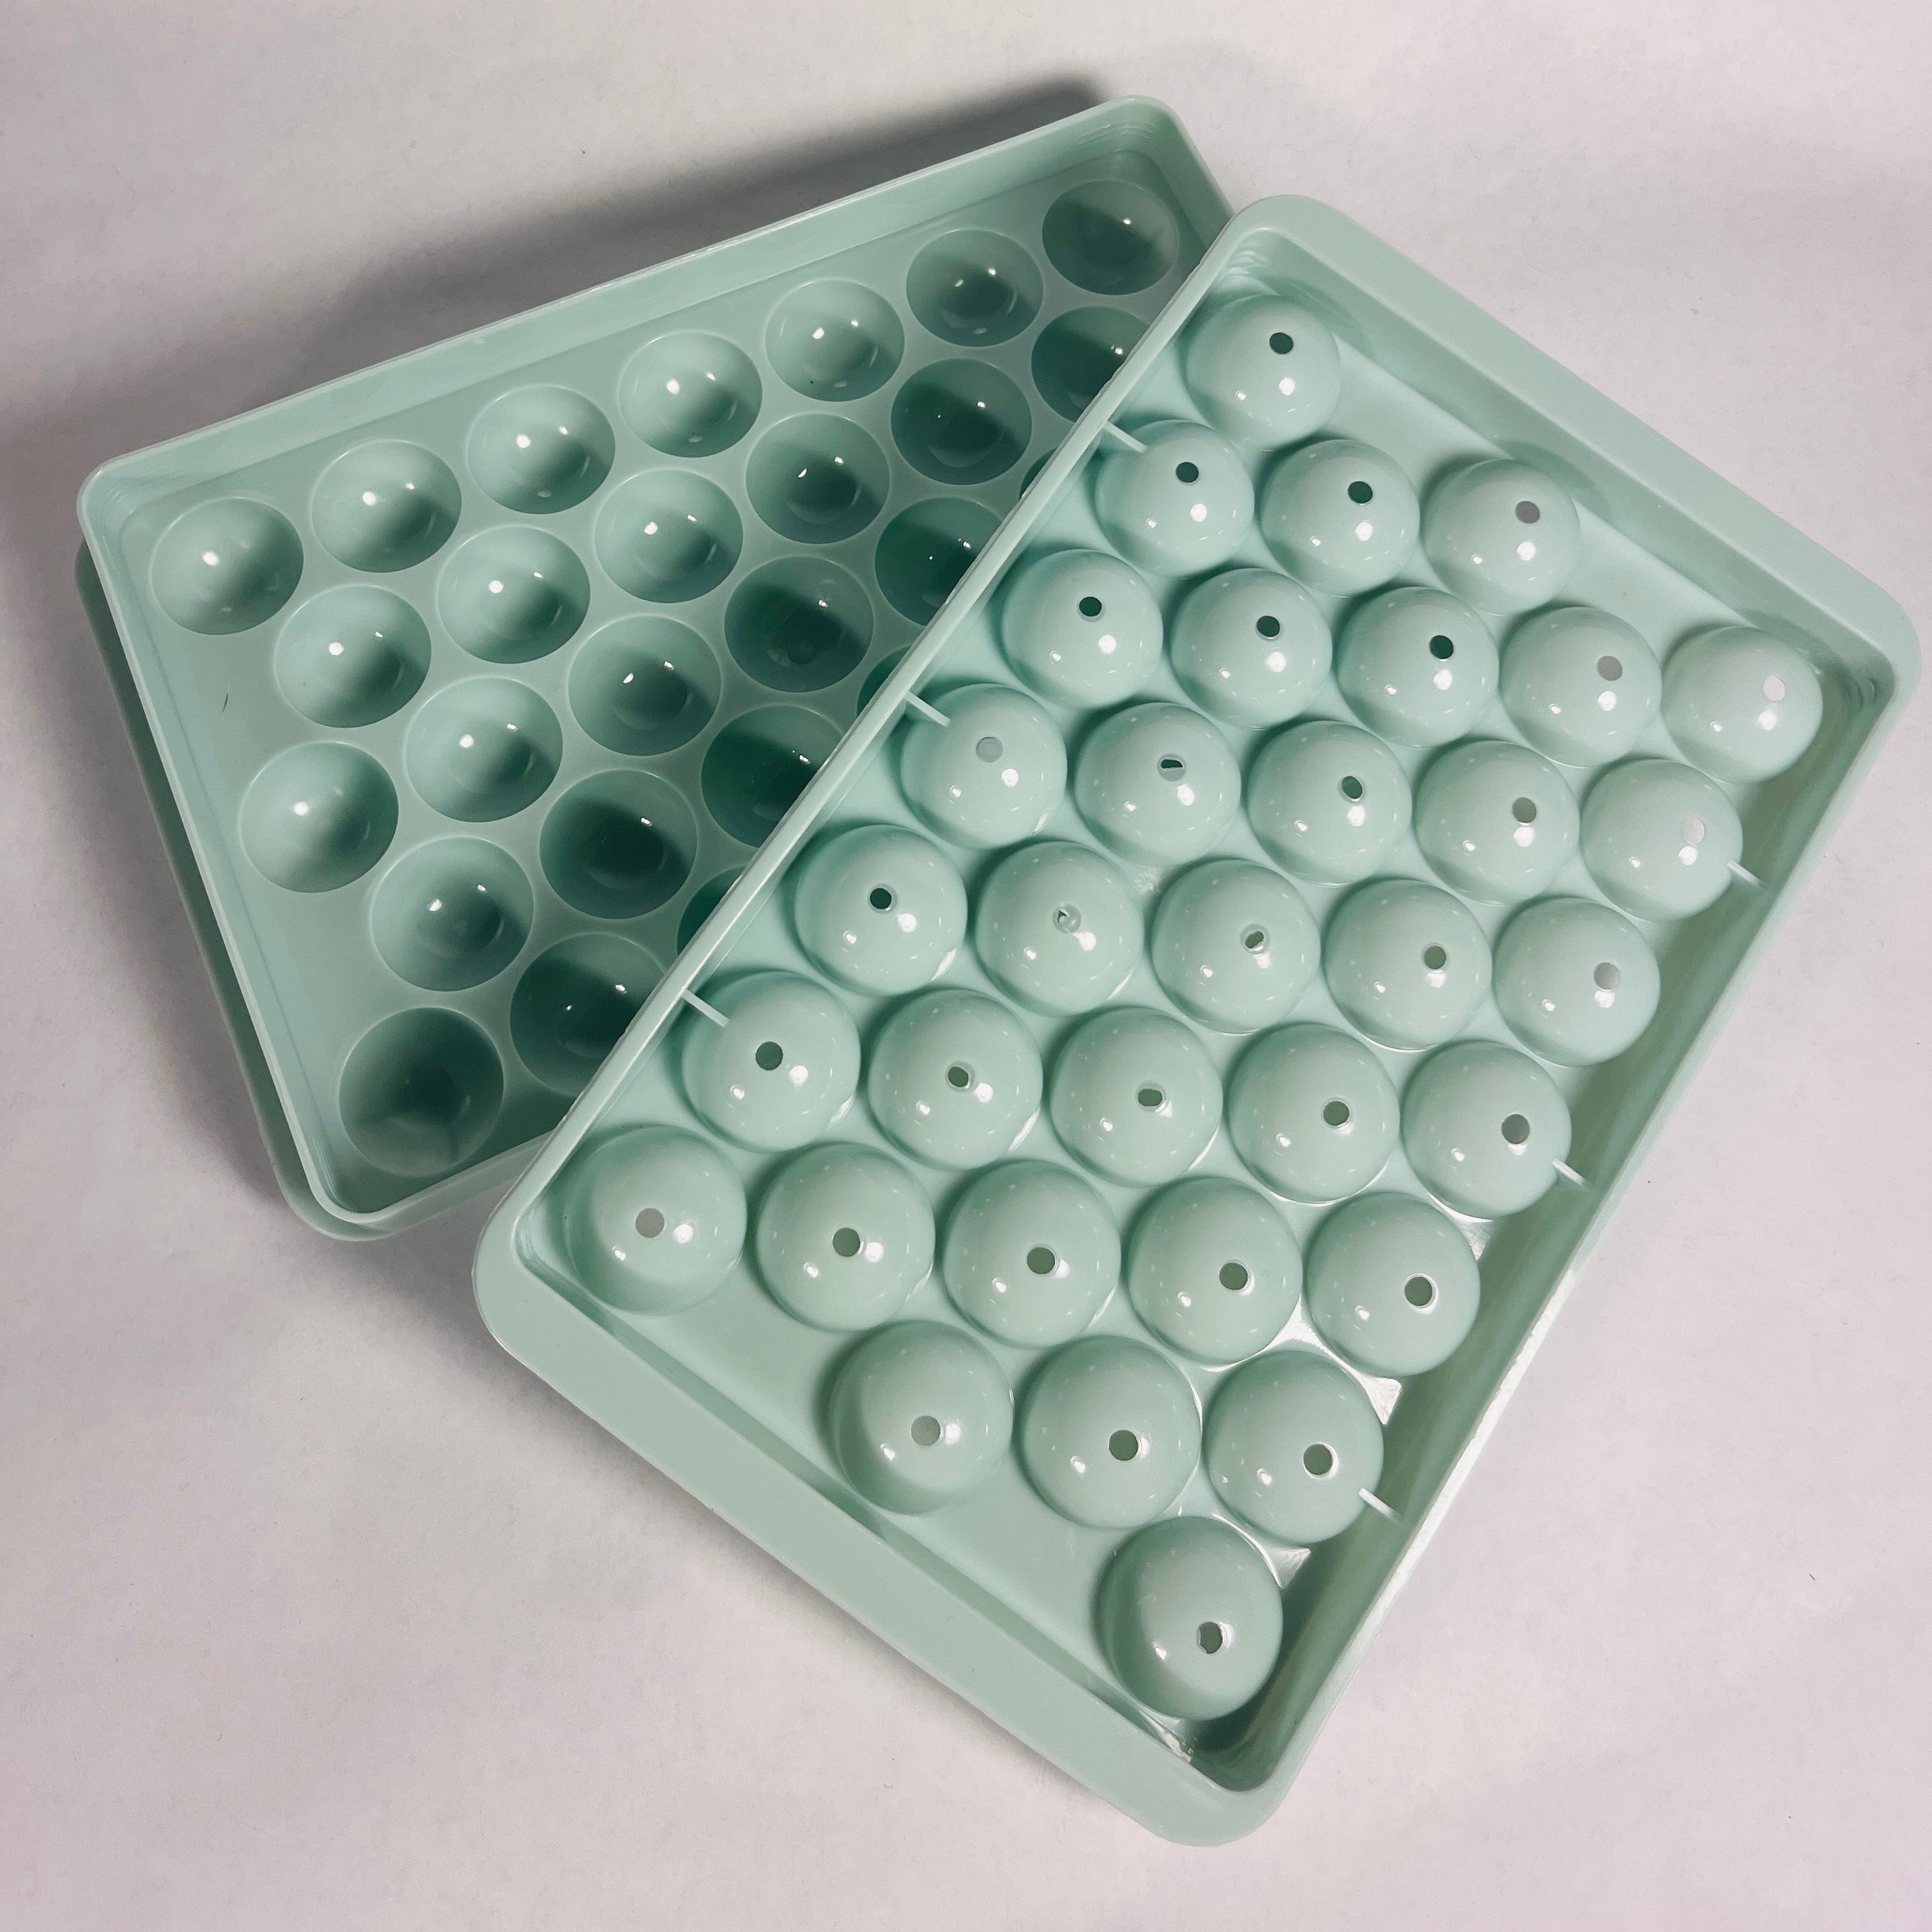 Sphere Ice Cube Tray w/ Bin Only $11.99 Shipped for  Prime Members